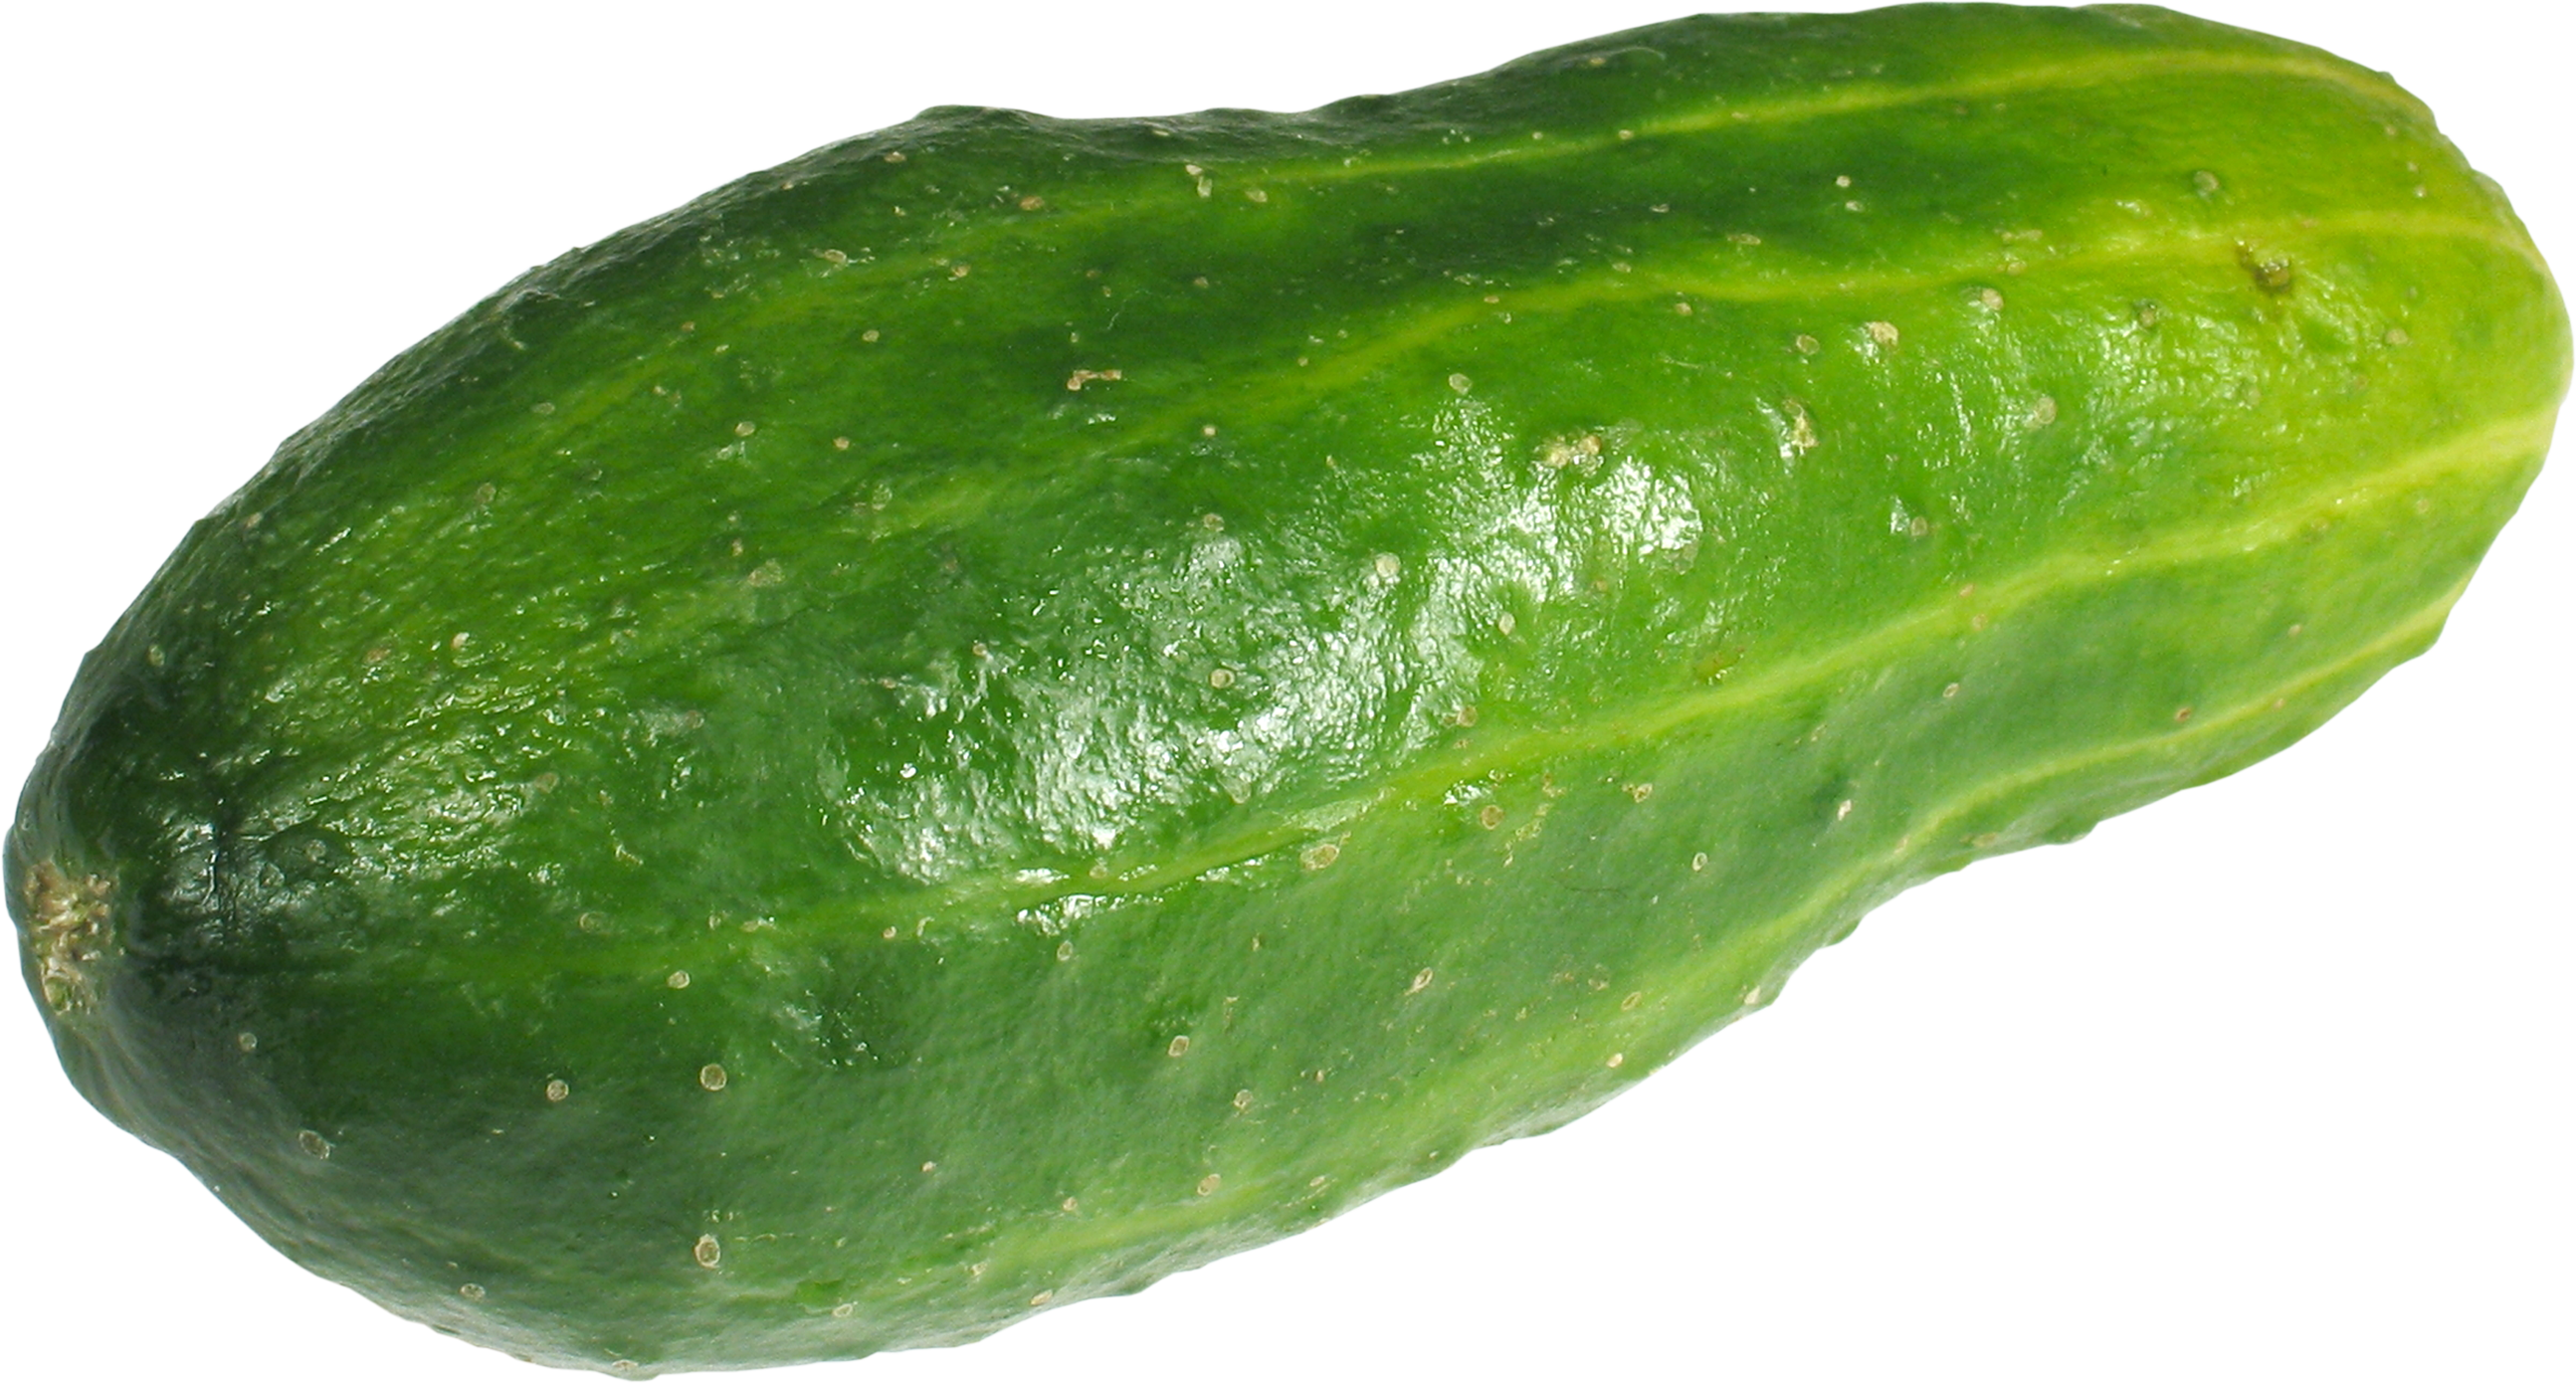 Cucumber PNG picture